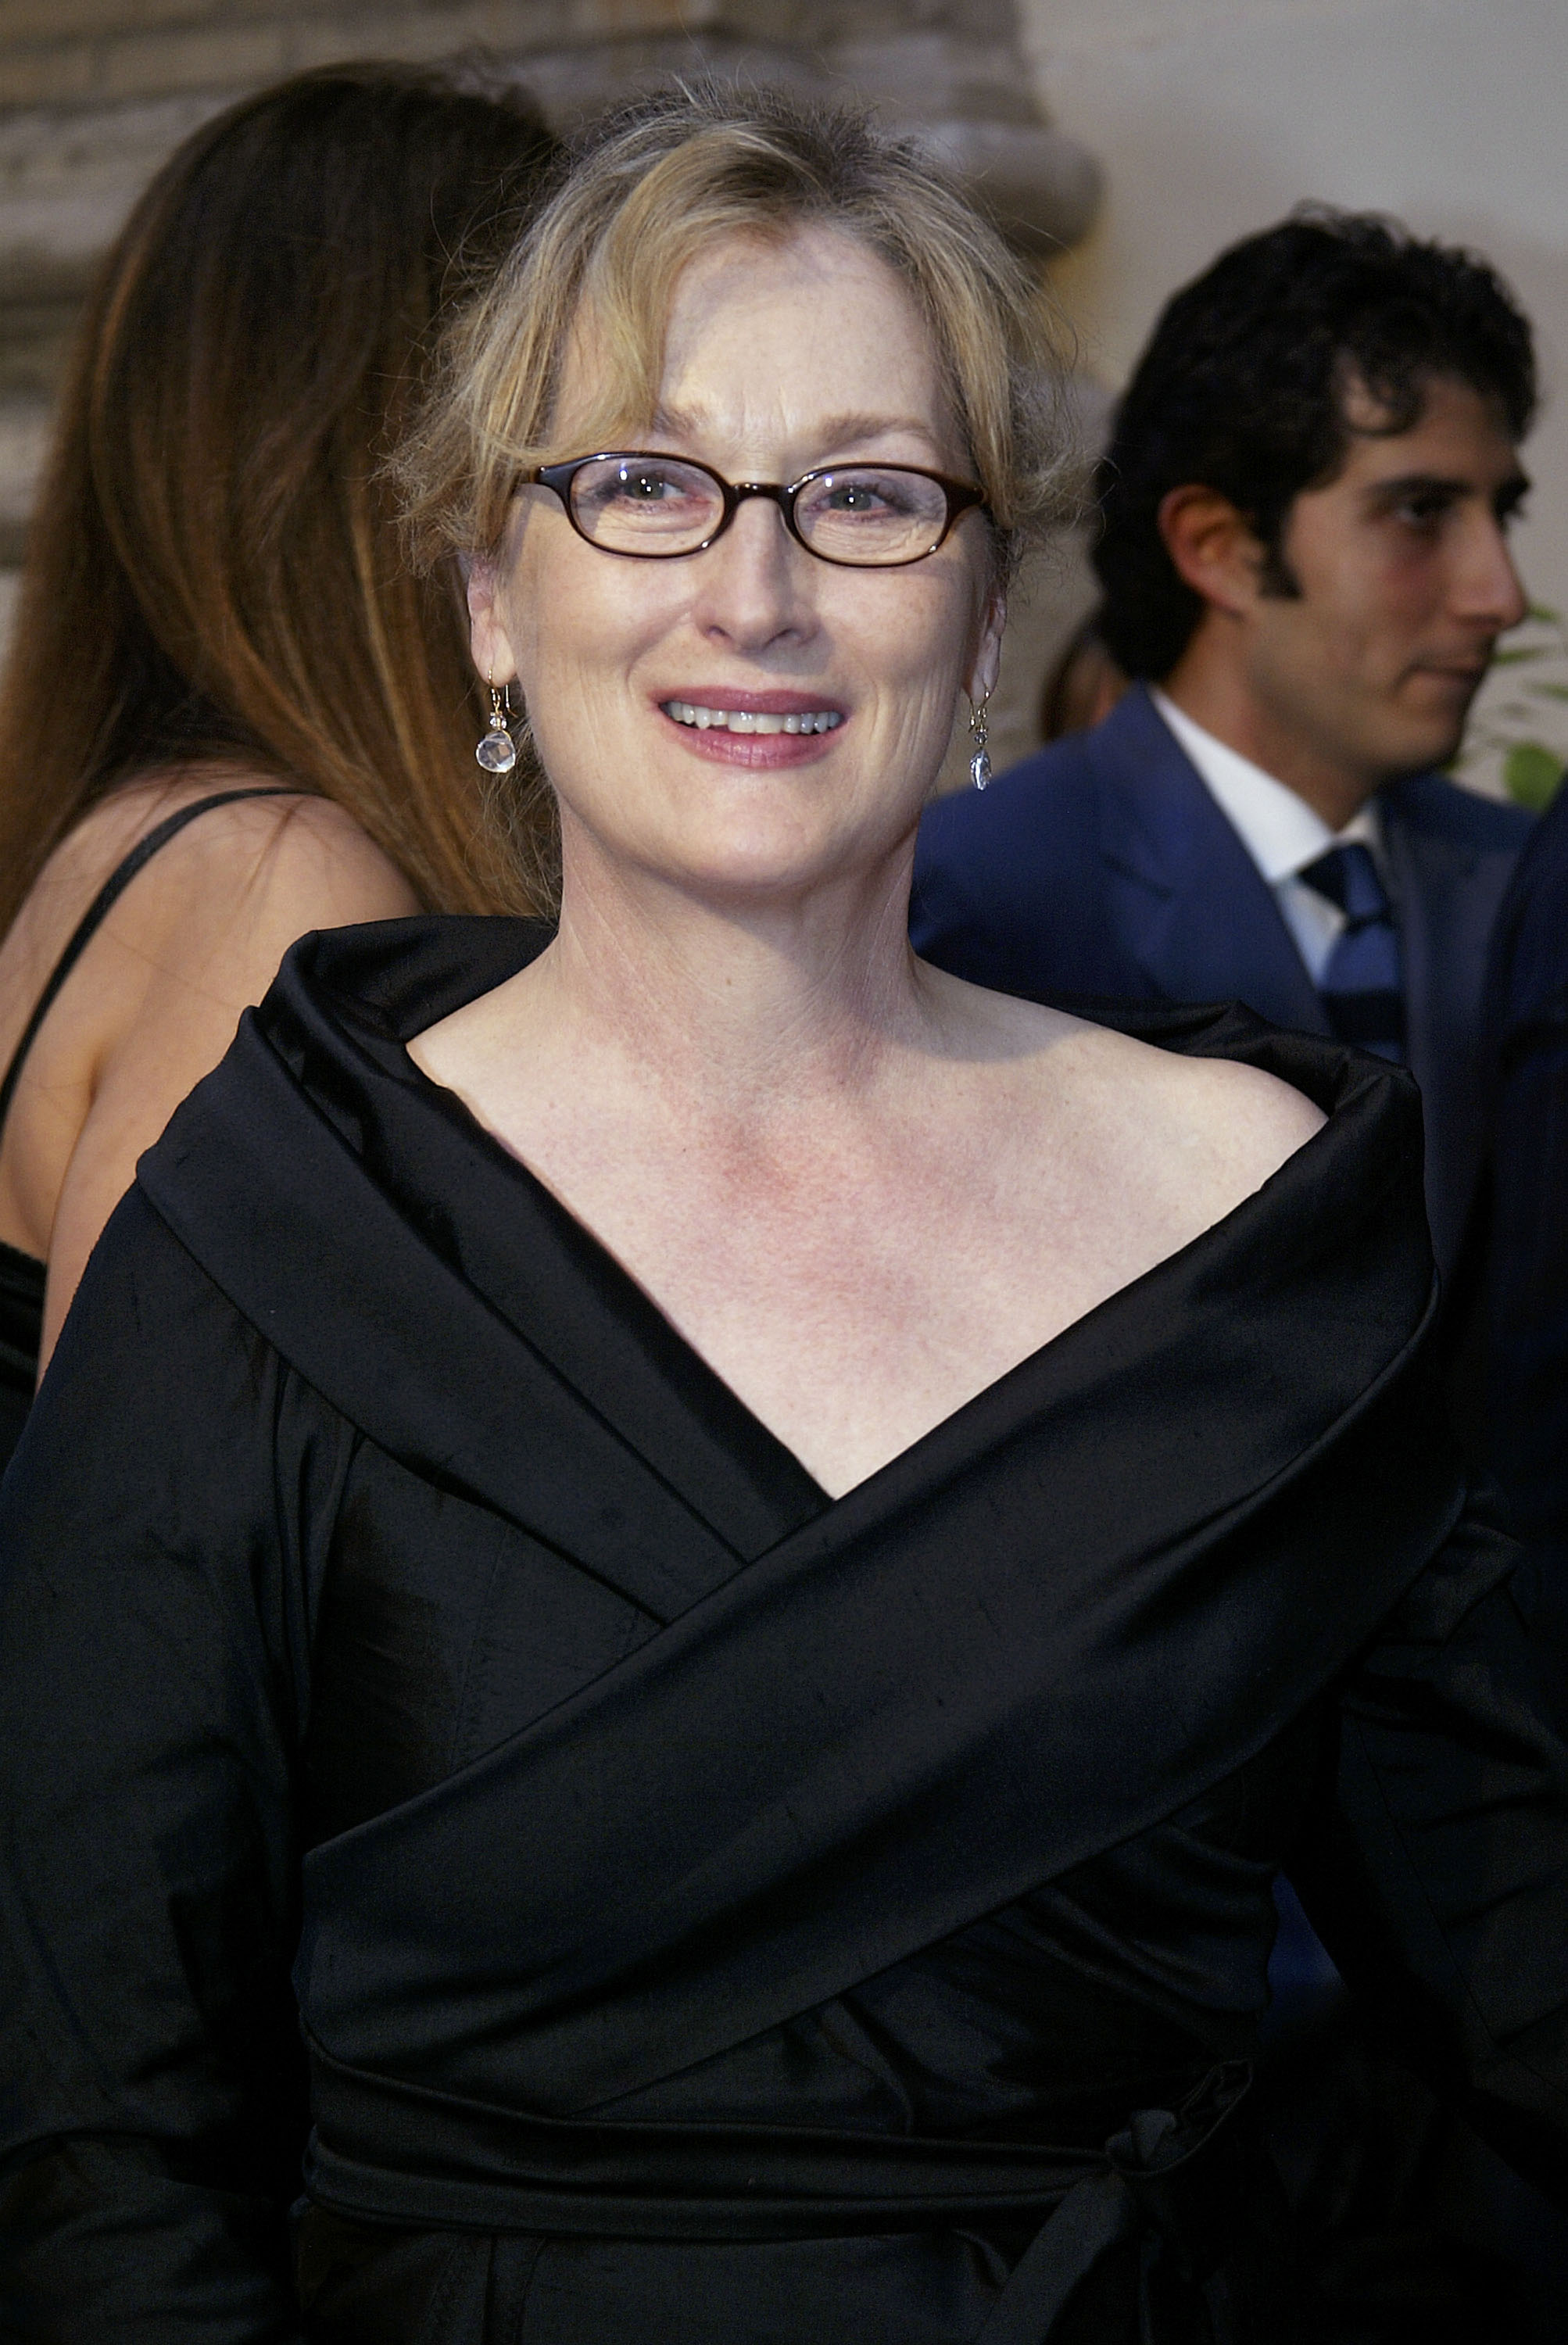 Meryl Streep attends the Robert De Niro Sr. painting exhibition on May 16, 2005 | Source: Getty Images